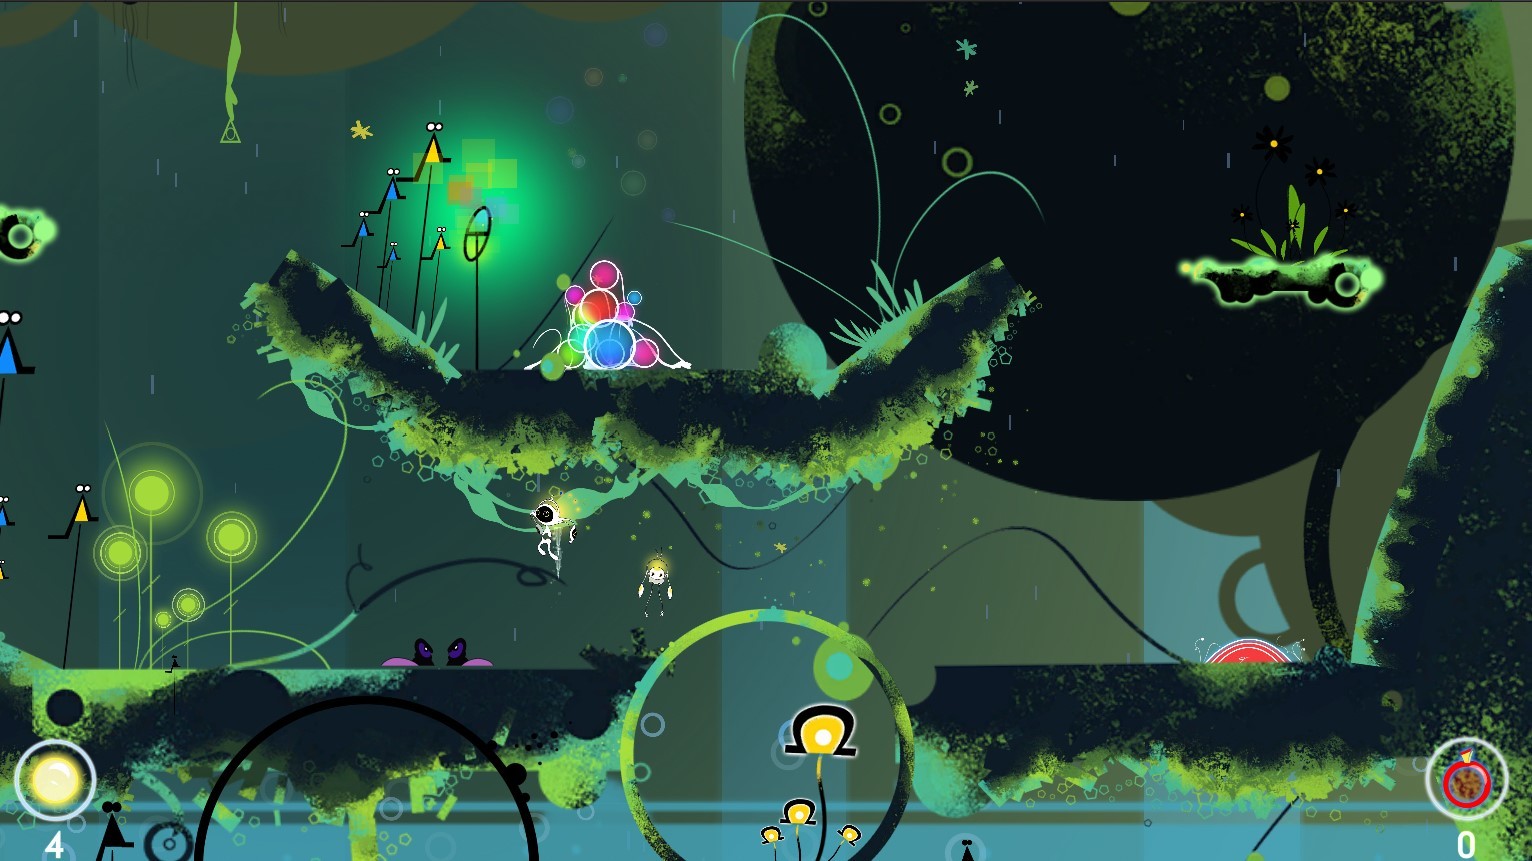 A Tale of Synapse: The Chaos Theories screenshot